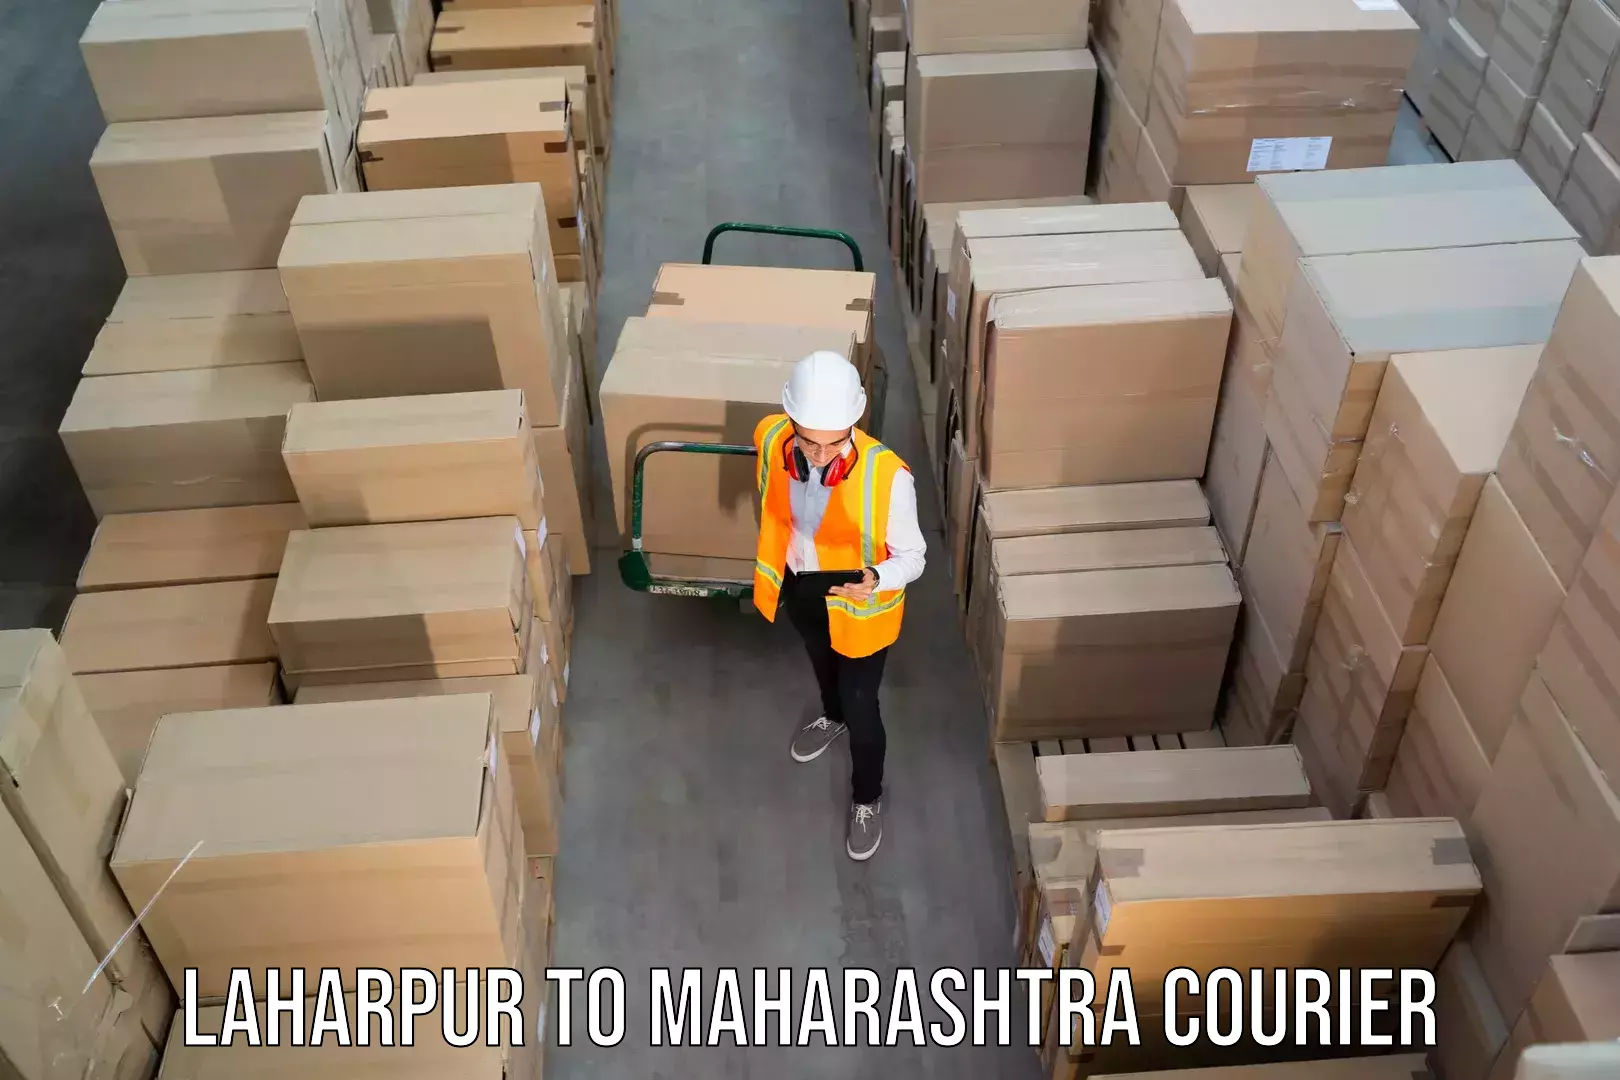 State-of-the-art courier technology Laharpur to Maharashtra